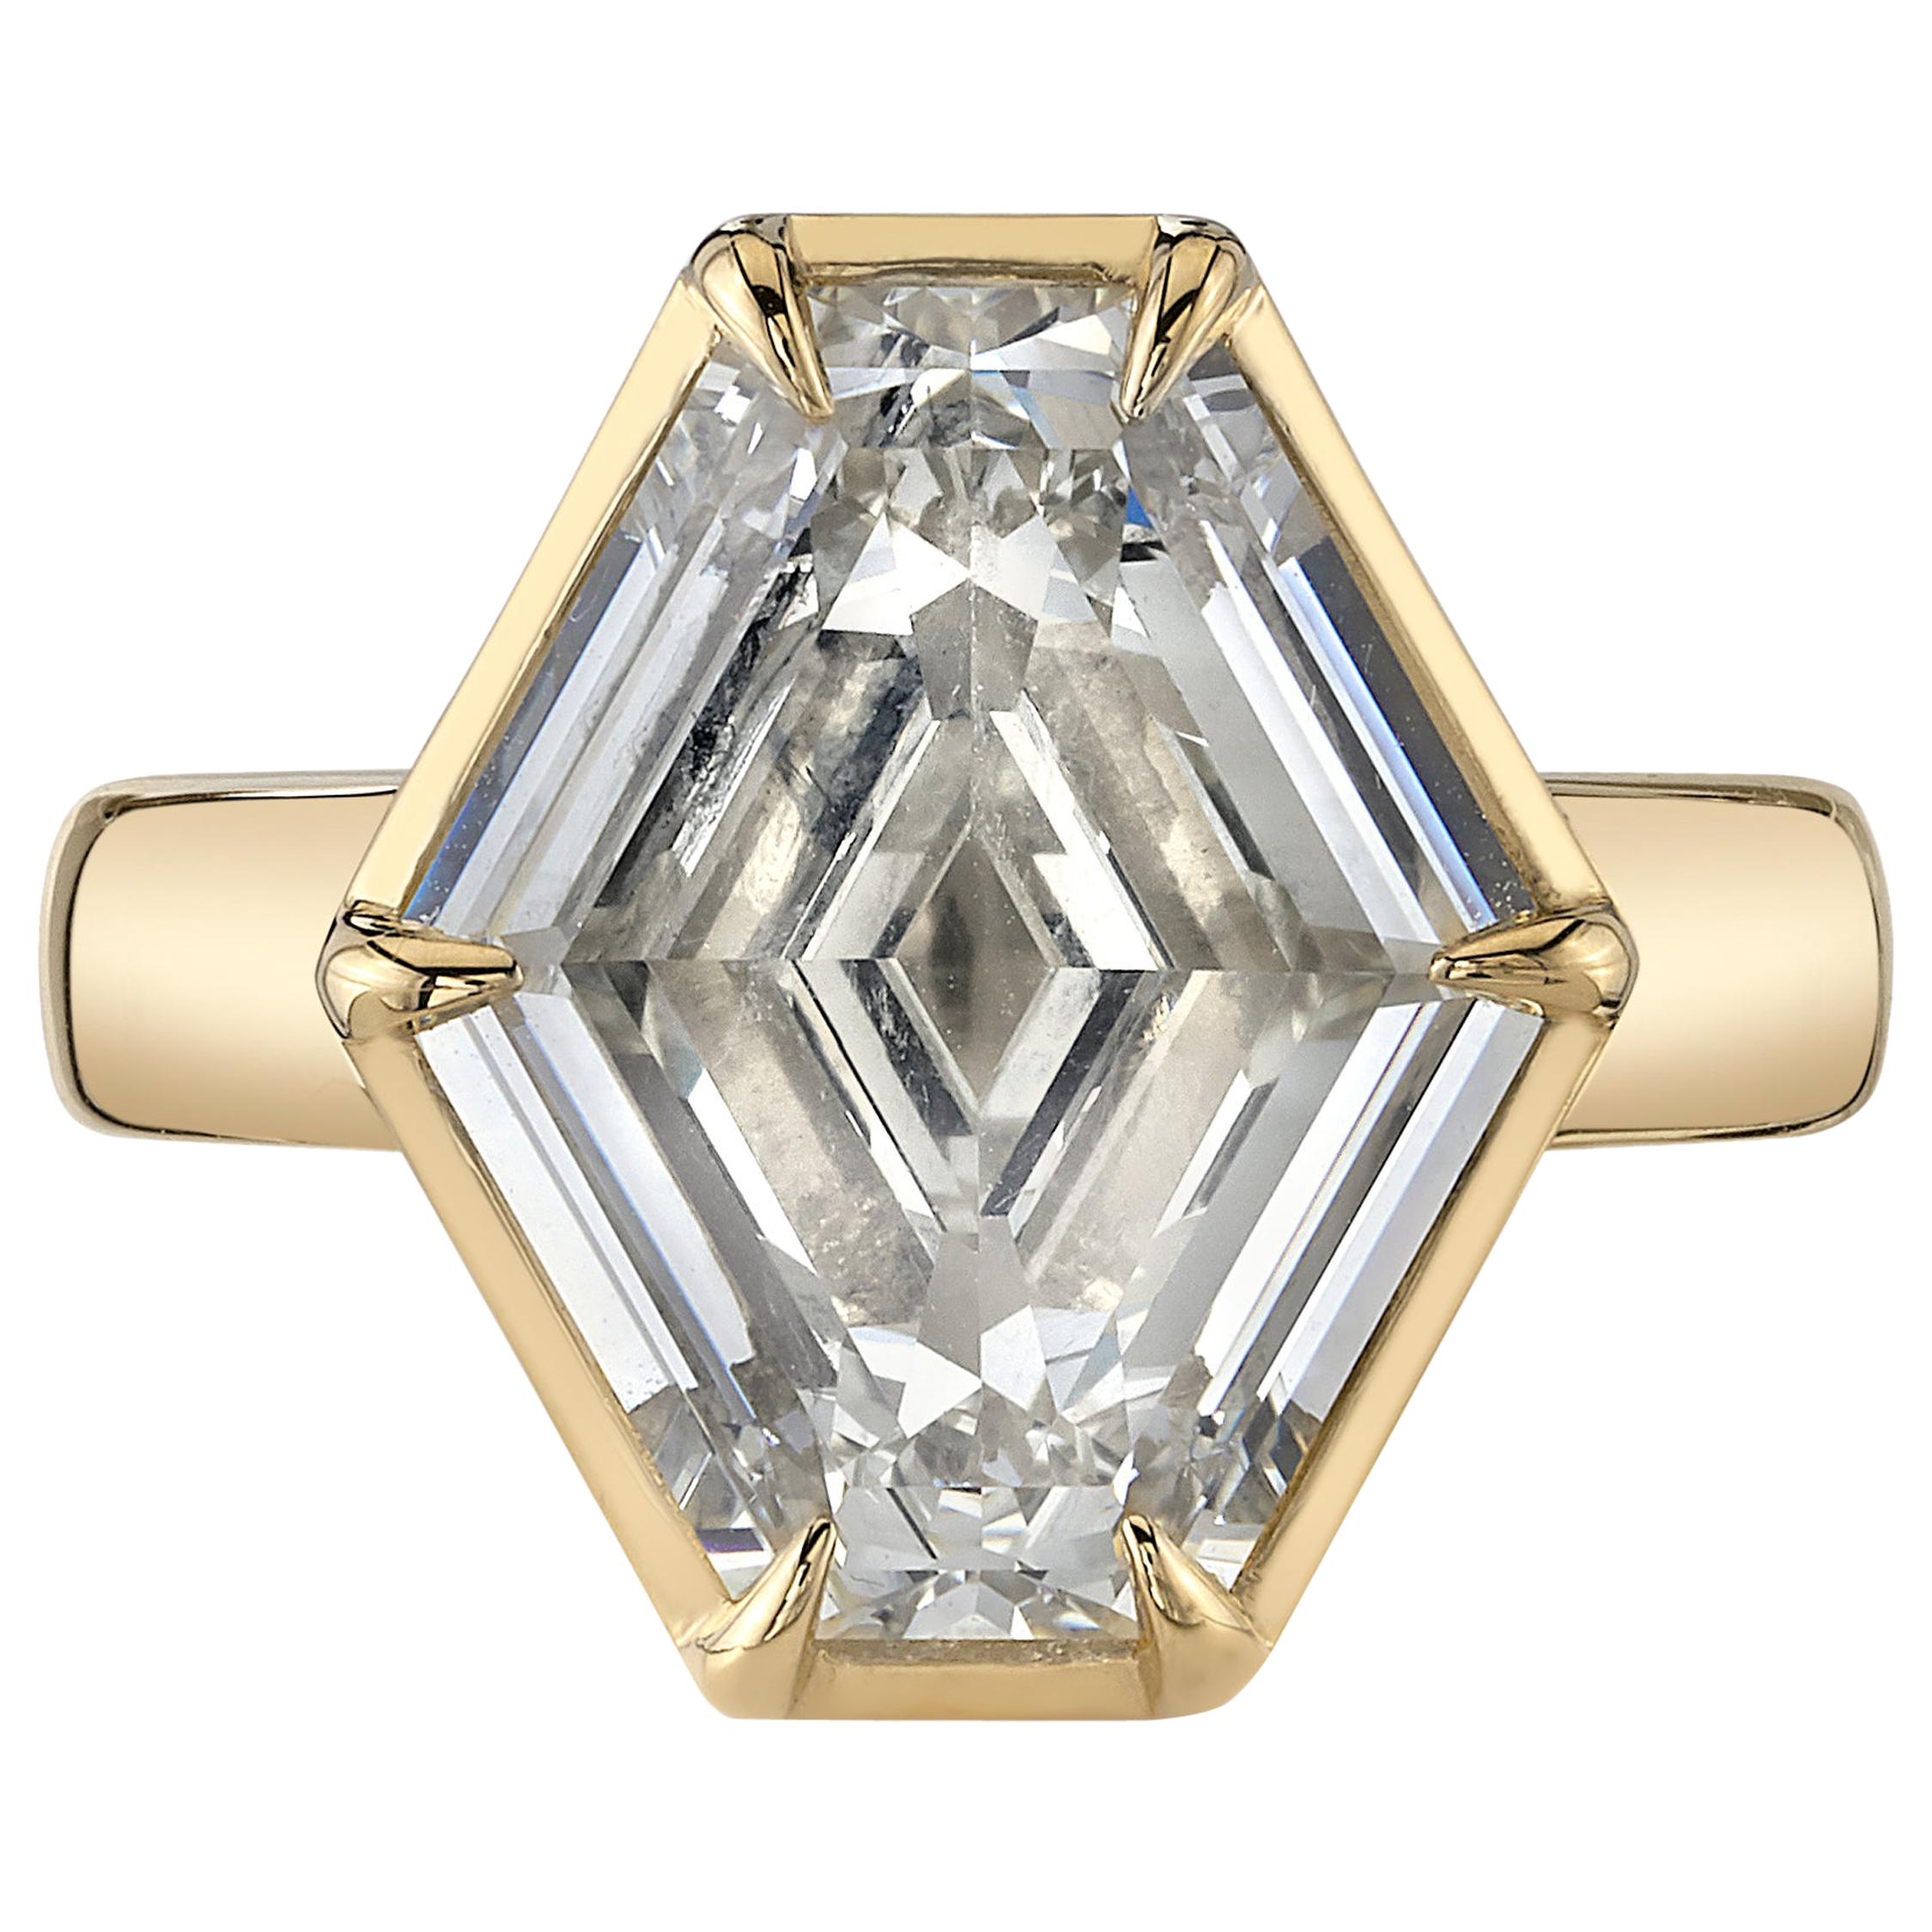 Handcrafted Odette Hexagonal Step Cut Diamond Ring by Single Stone